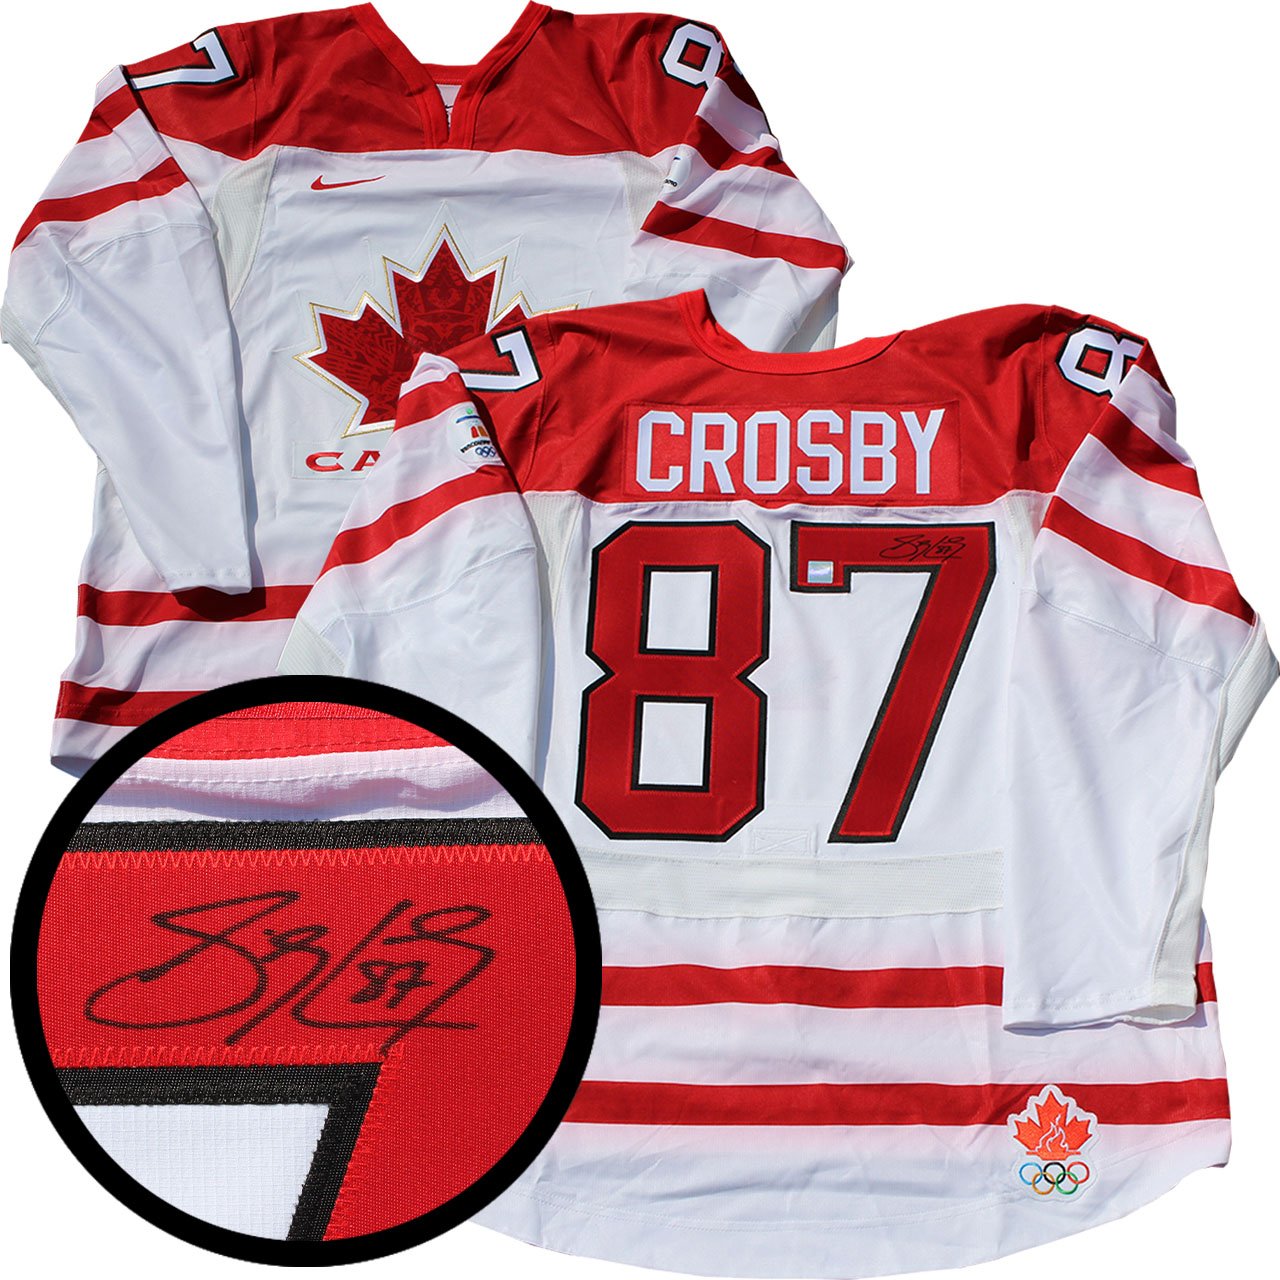 sidney crosby signed team canada jersey